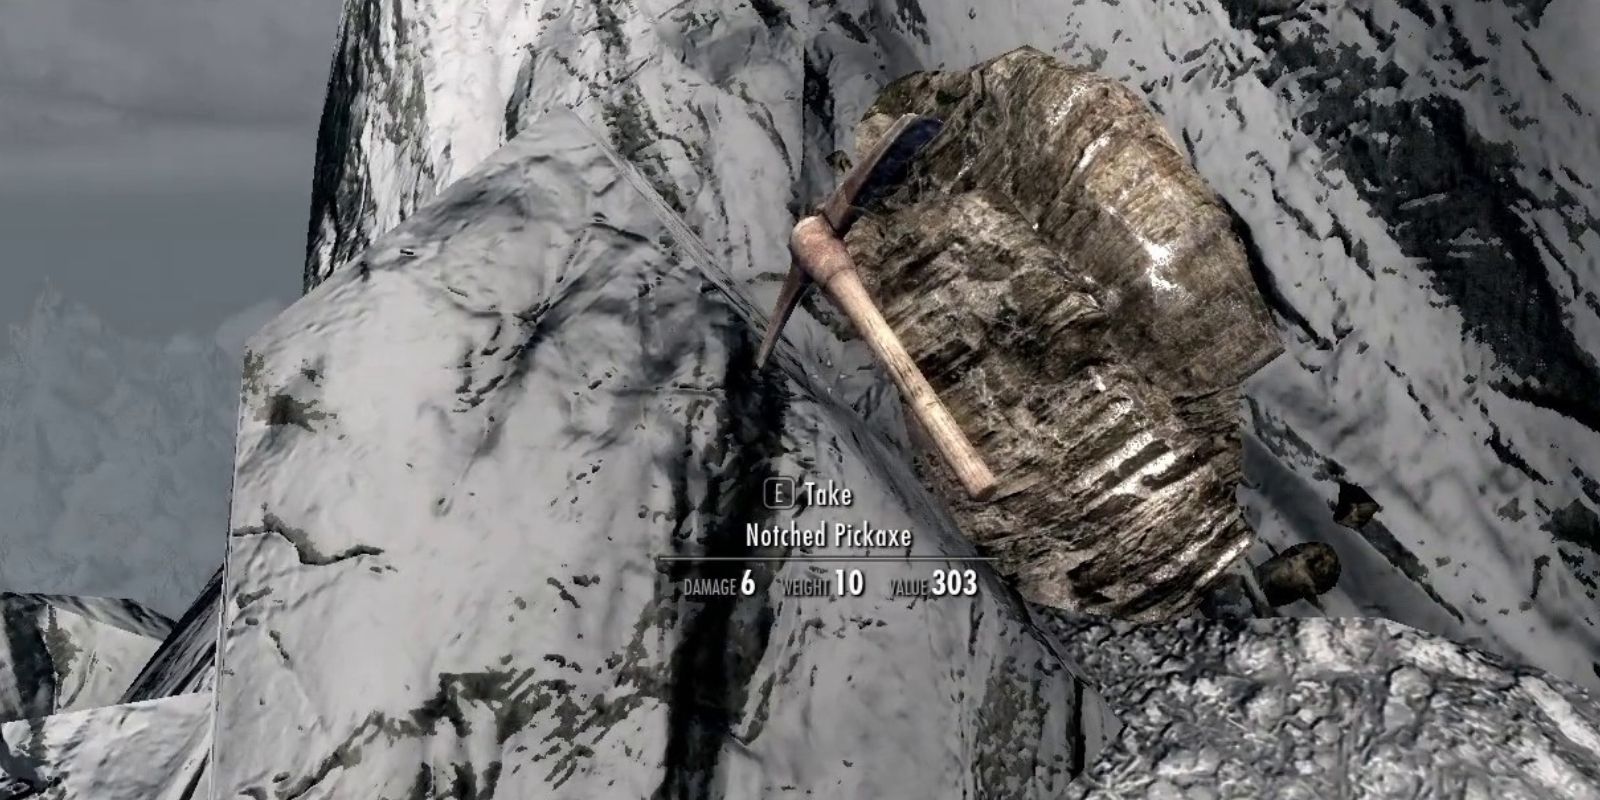 The Notched Pickaxe in Skyrim is a Minecraft Easter egg.